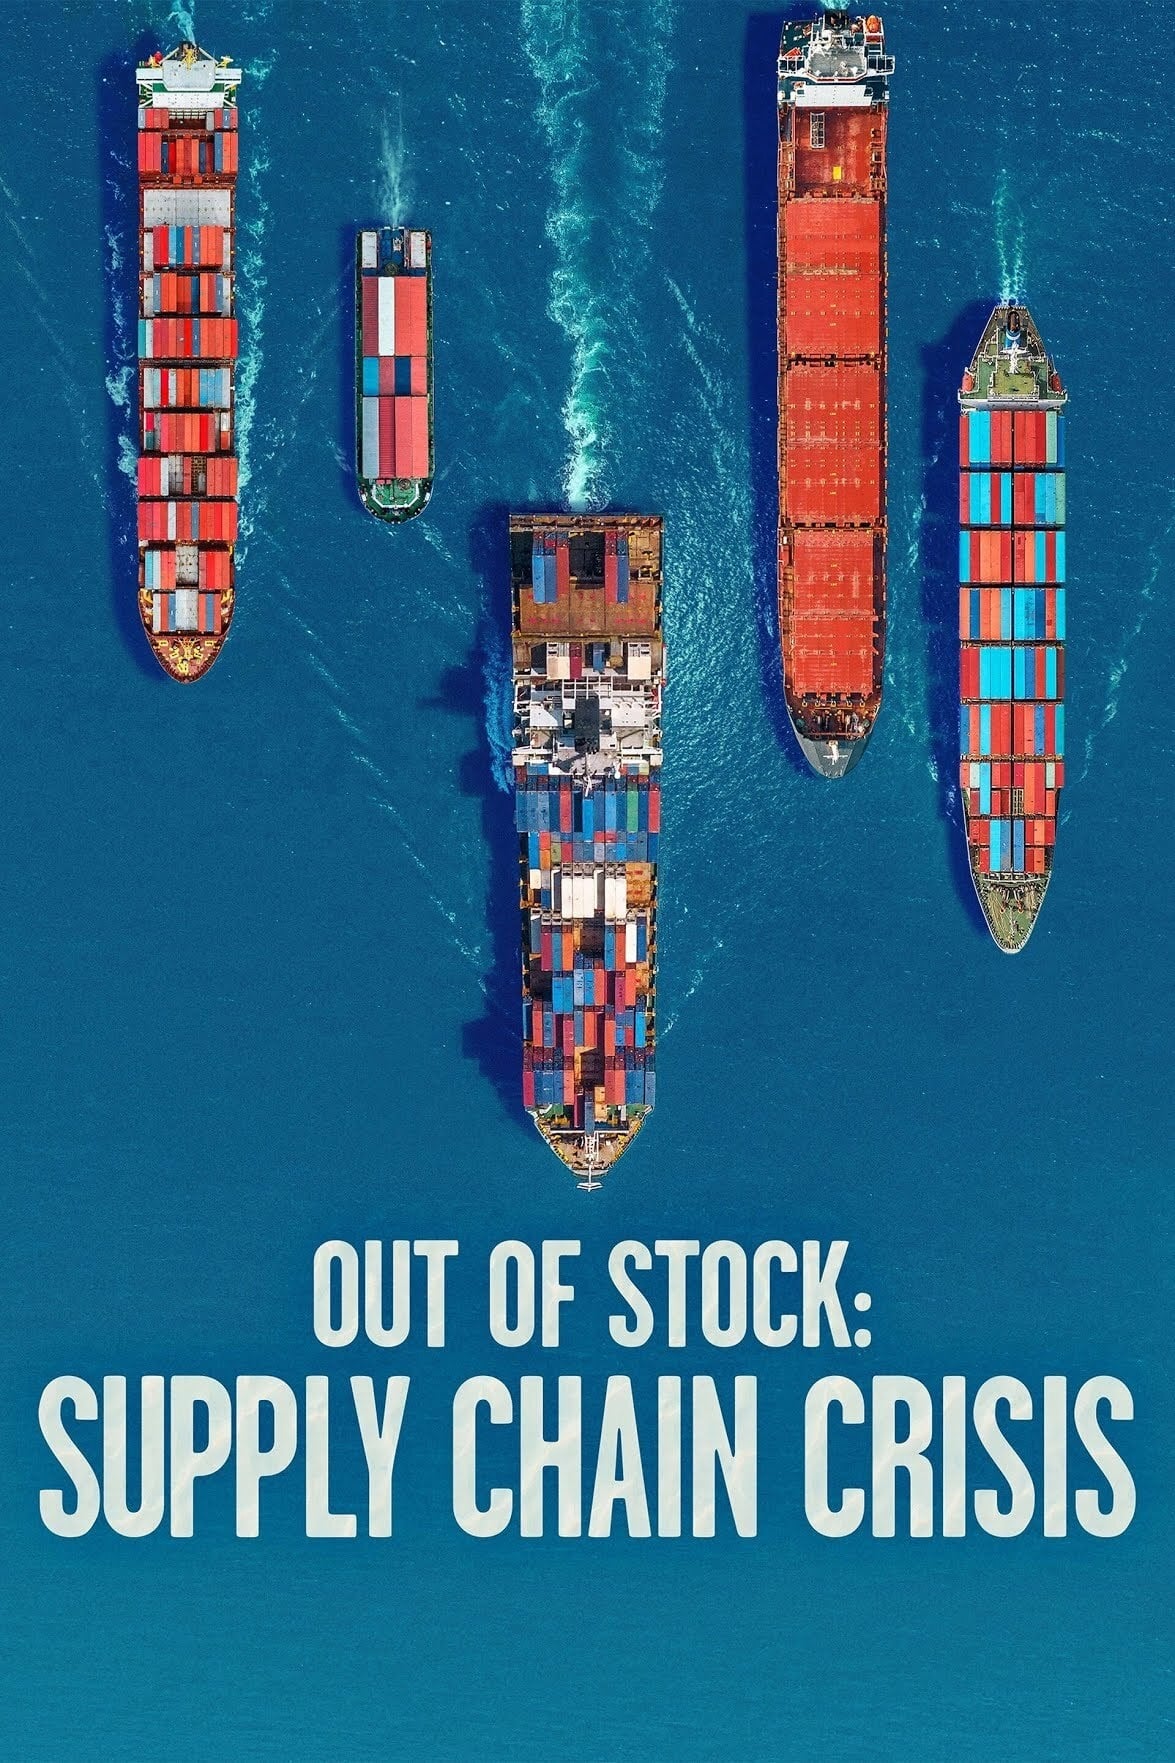 Out of Stock: Supply Chain Crisis